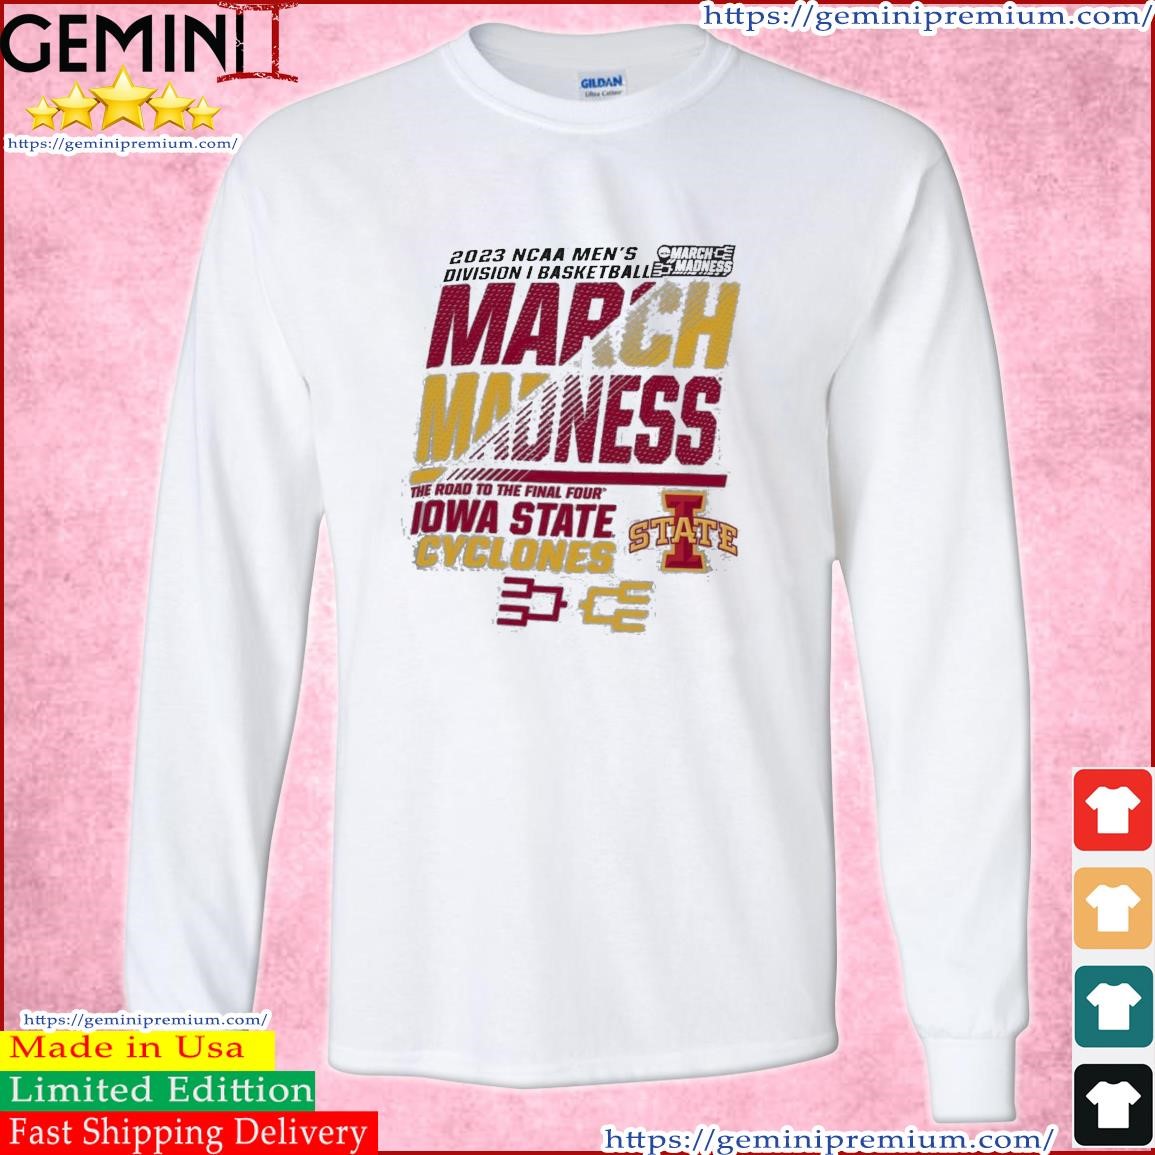 Iowa State Men's Basketball 2023 NCAA March Madness The Road To Final Four Shirt Long Sleeve Tee.jpg